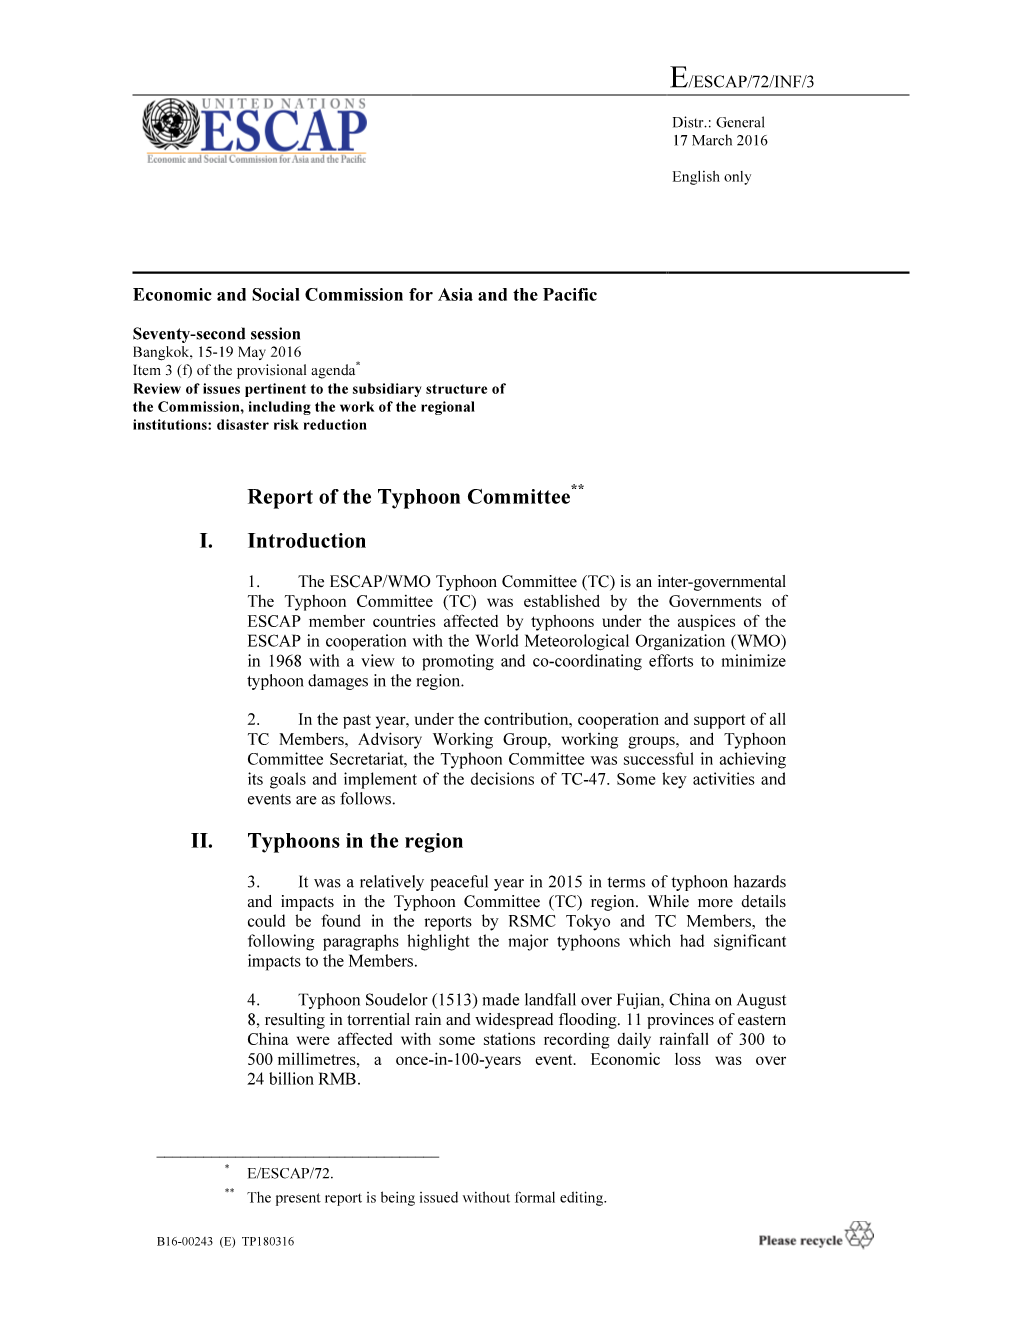 Report of the Typhoon Committee I